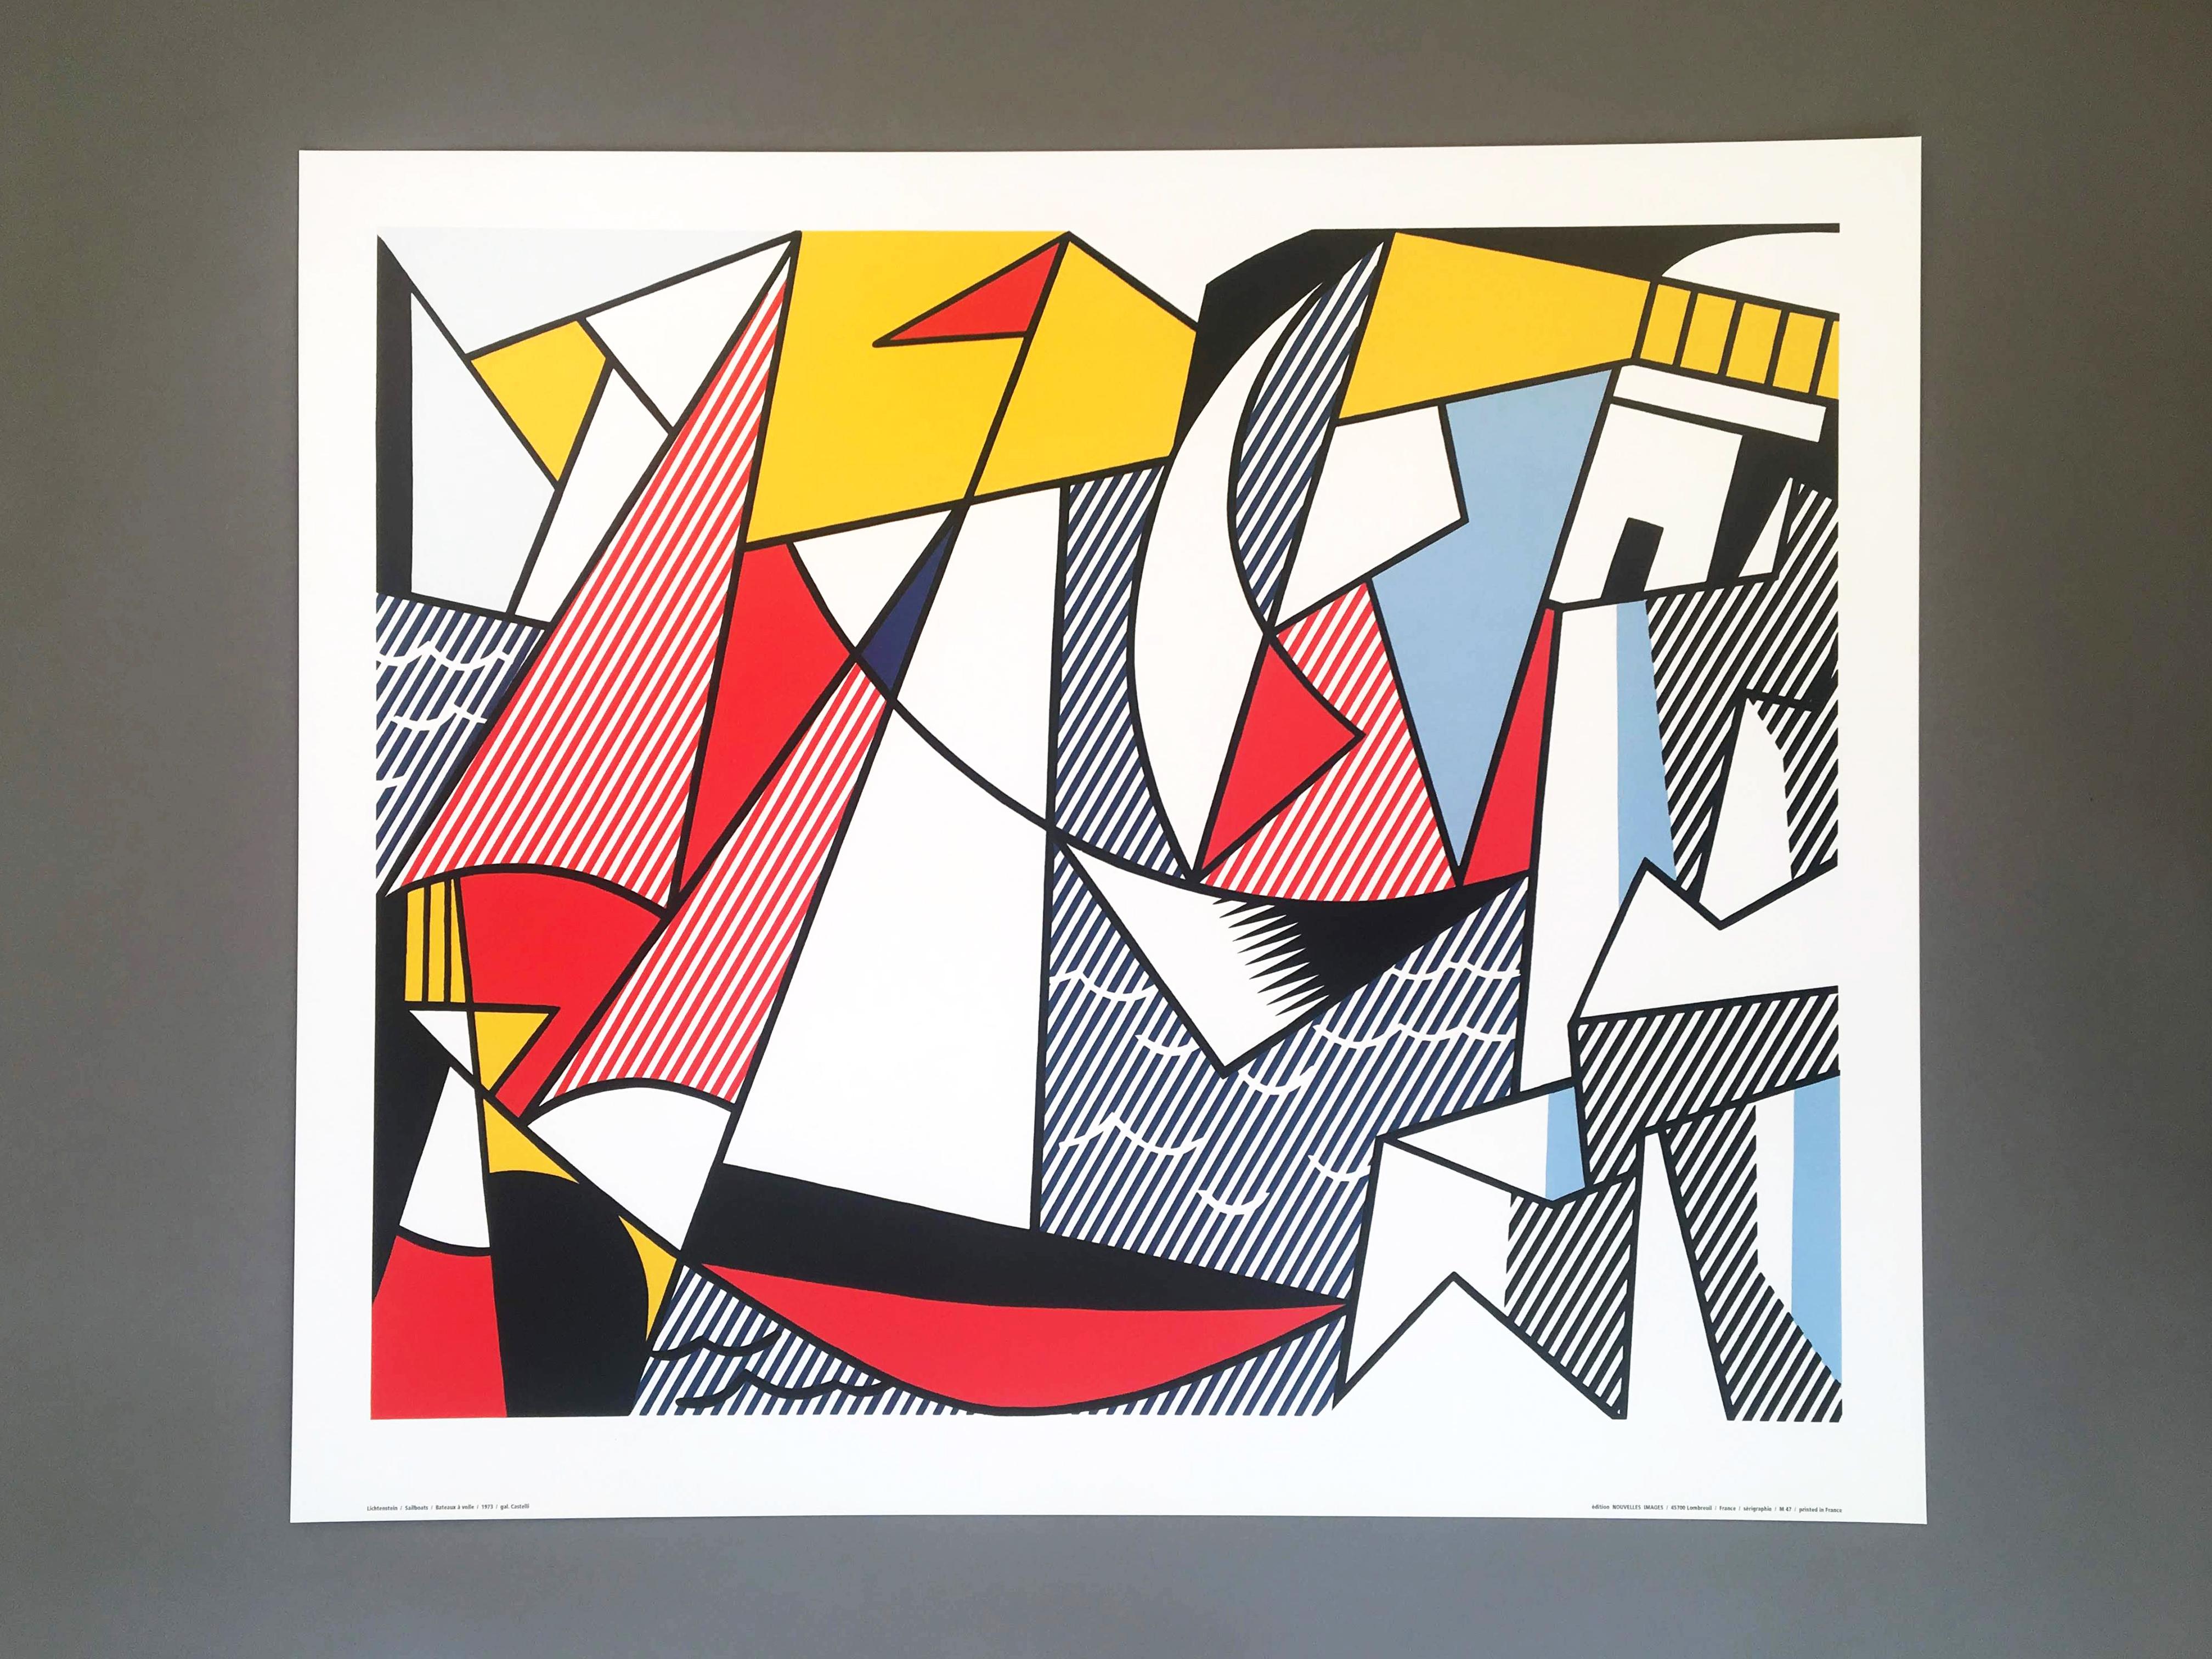 Roy Lichtenstein (United States, 1923-1997)
'Sailboats', 1973
 
The image features Lichtenstein's pop art deconstruction of boats by the harbor from the painting 'Sailboats' from 1973. This print was published by the Leo Castelli Gallery and printed